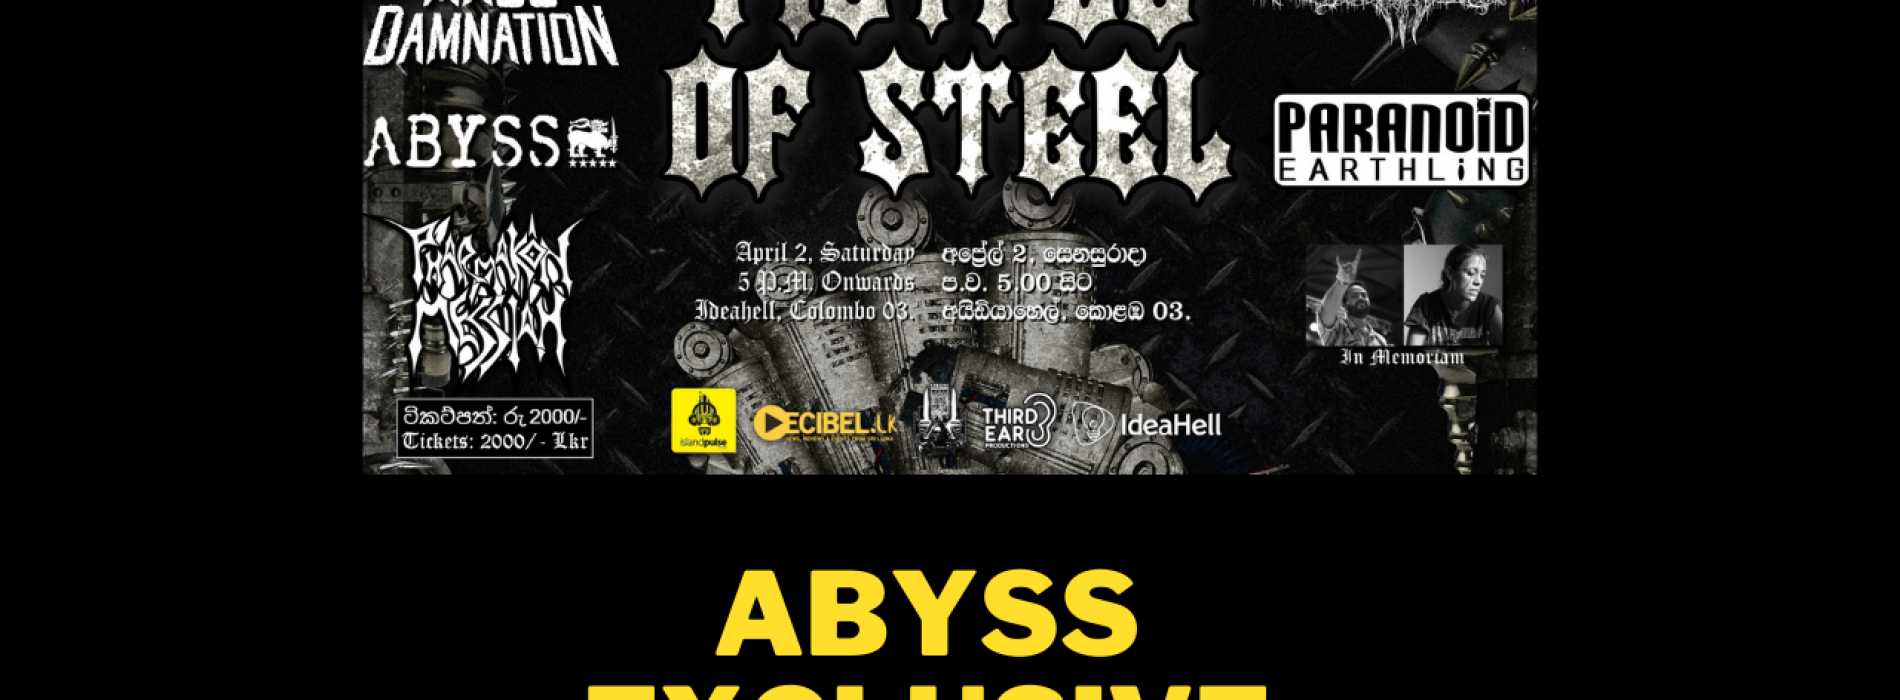 News : Abyss To Take Stage @ A Fitful Of Steel On Saturday!